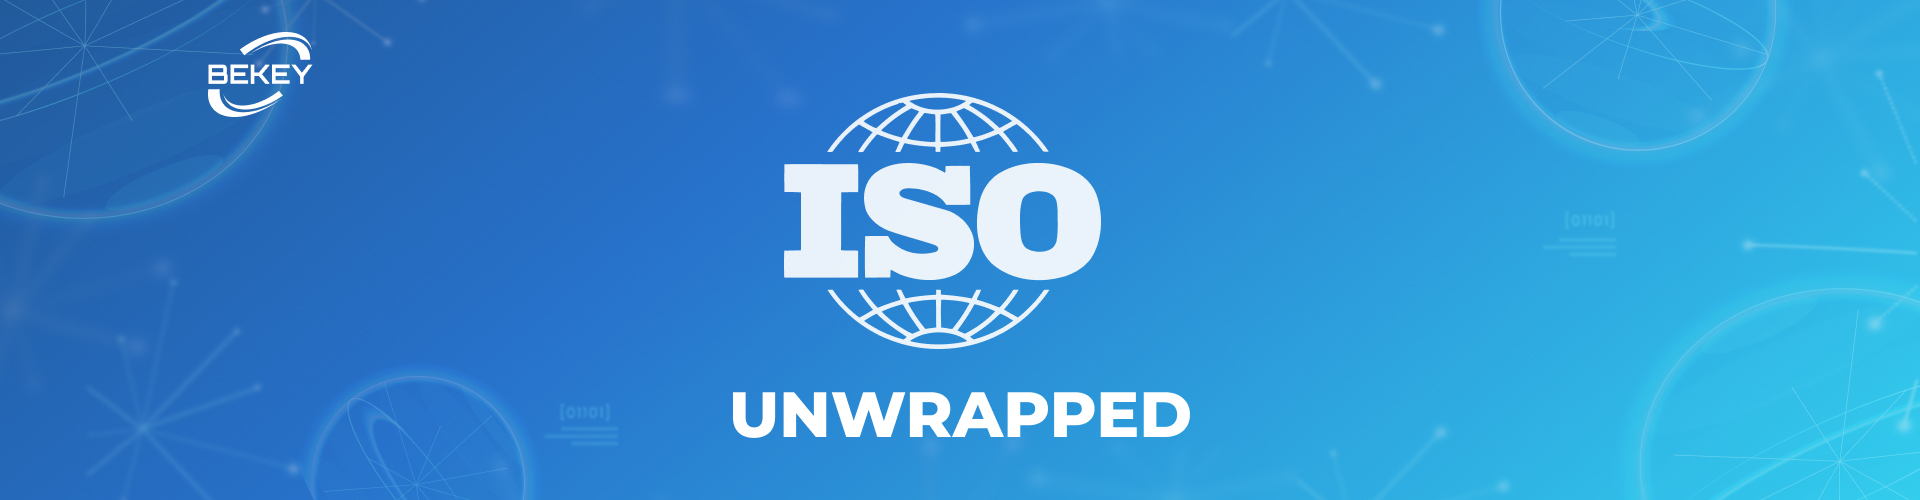 ISO Unwrapped: Why It’s Essential for Healthcare Companies - image